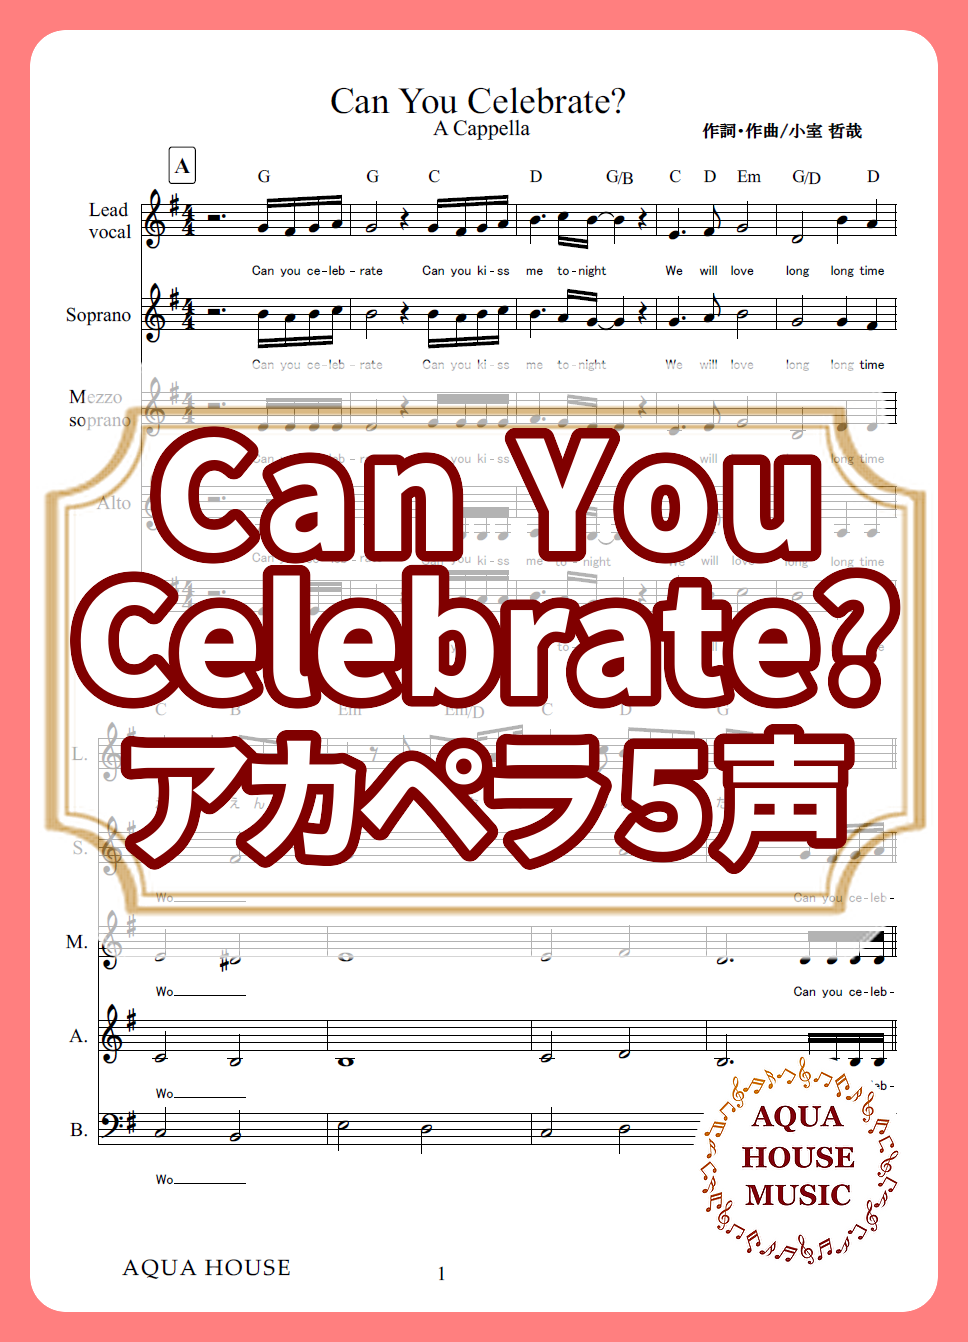 canyoucelebrate.png